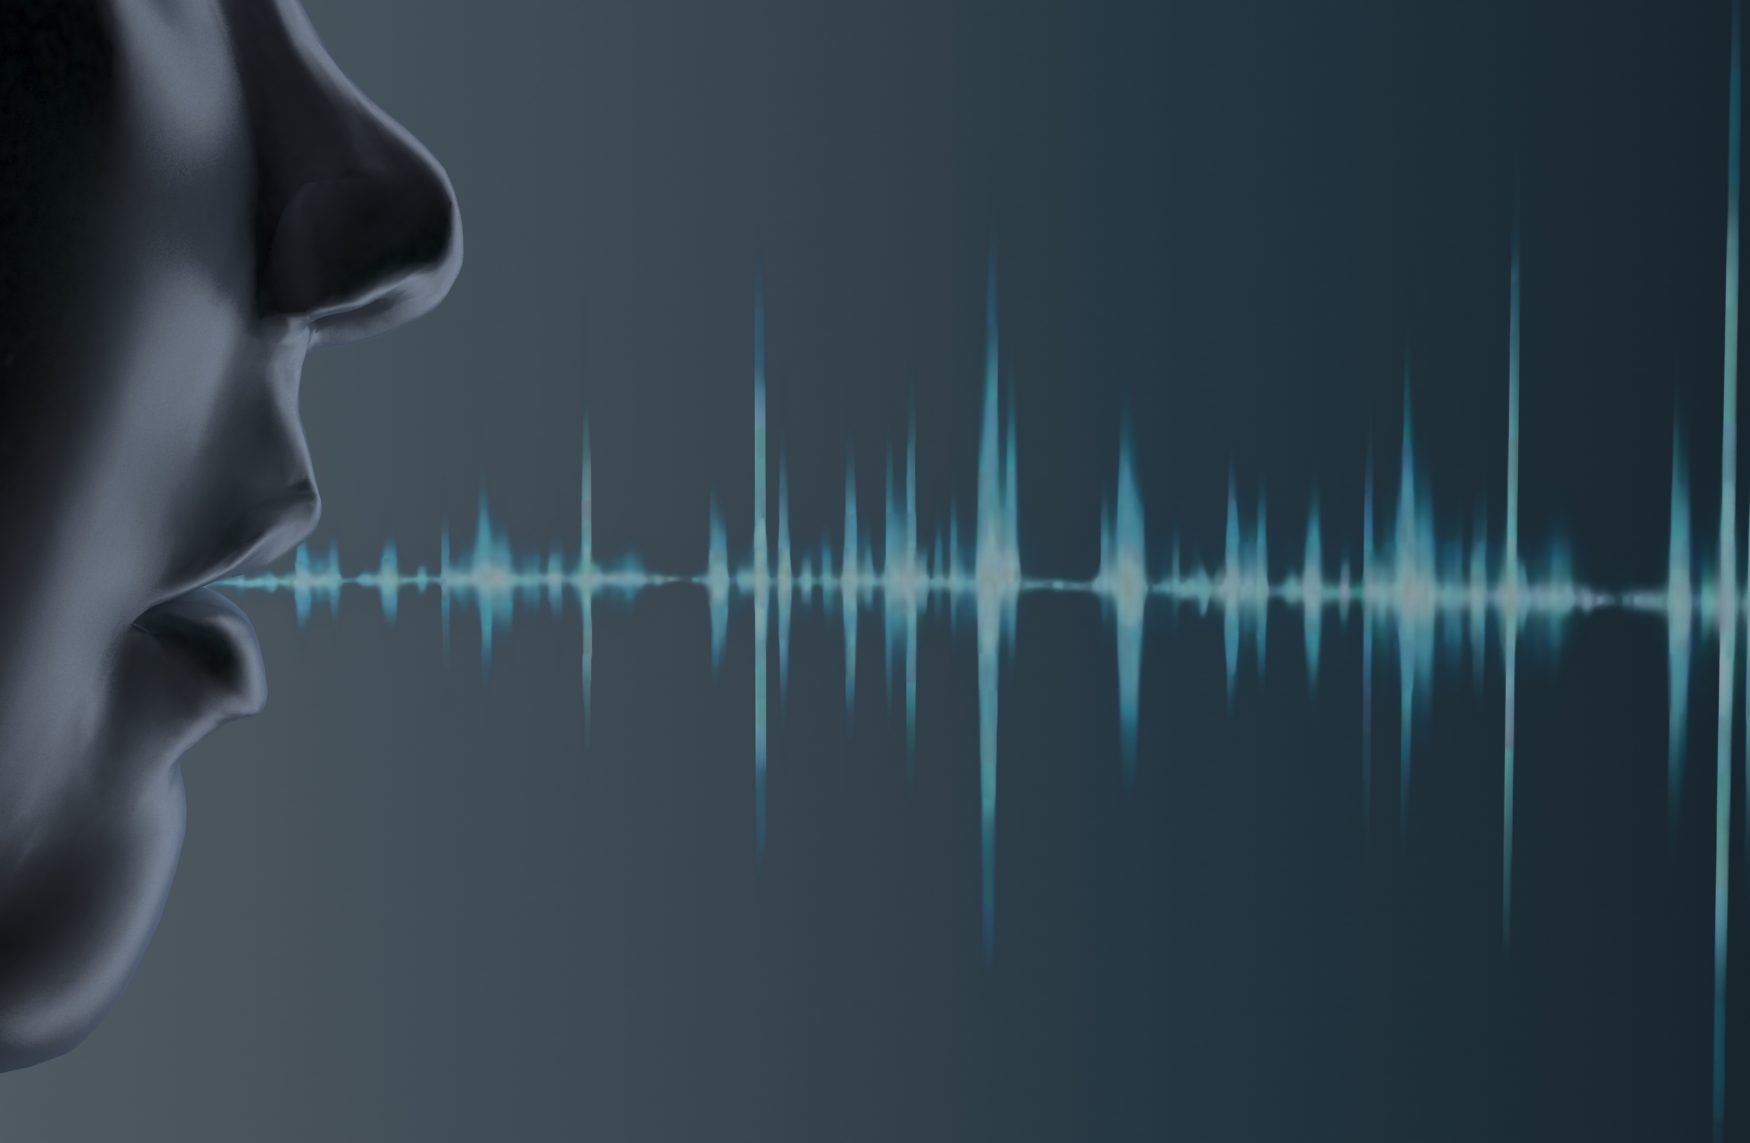 Advanced Speech Recognition Could Spell Trouble